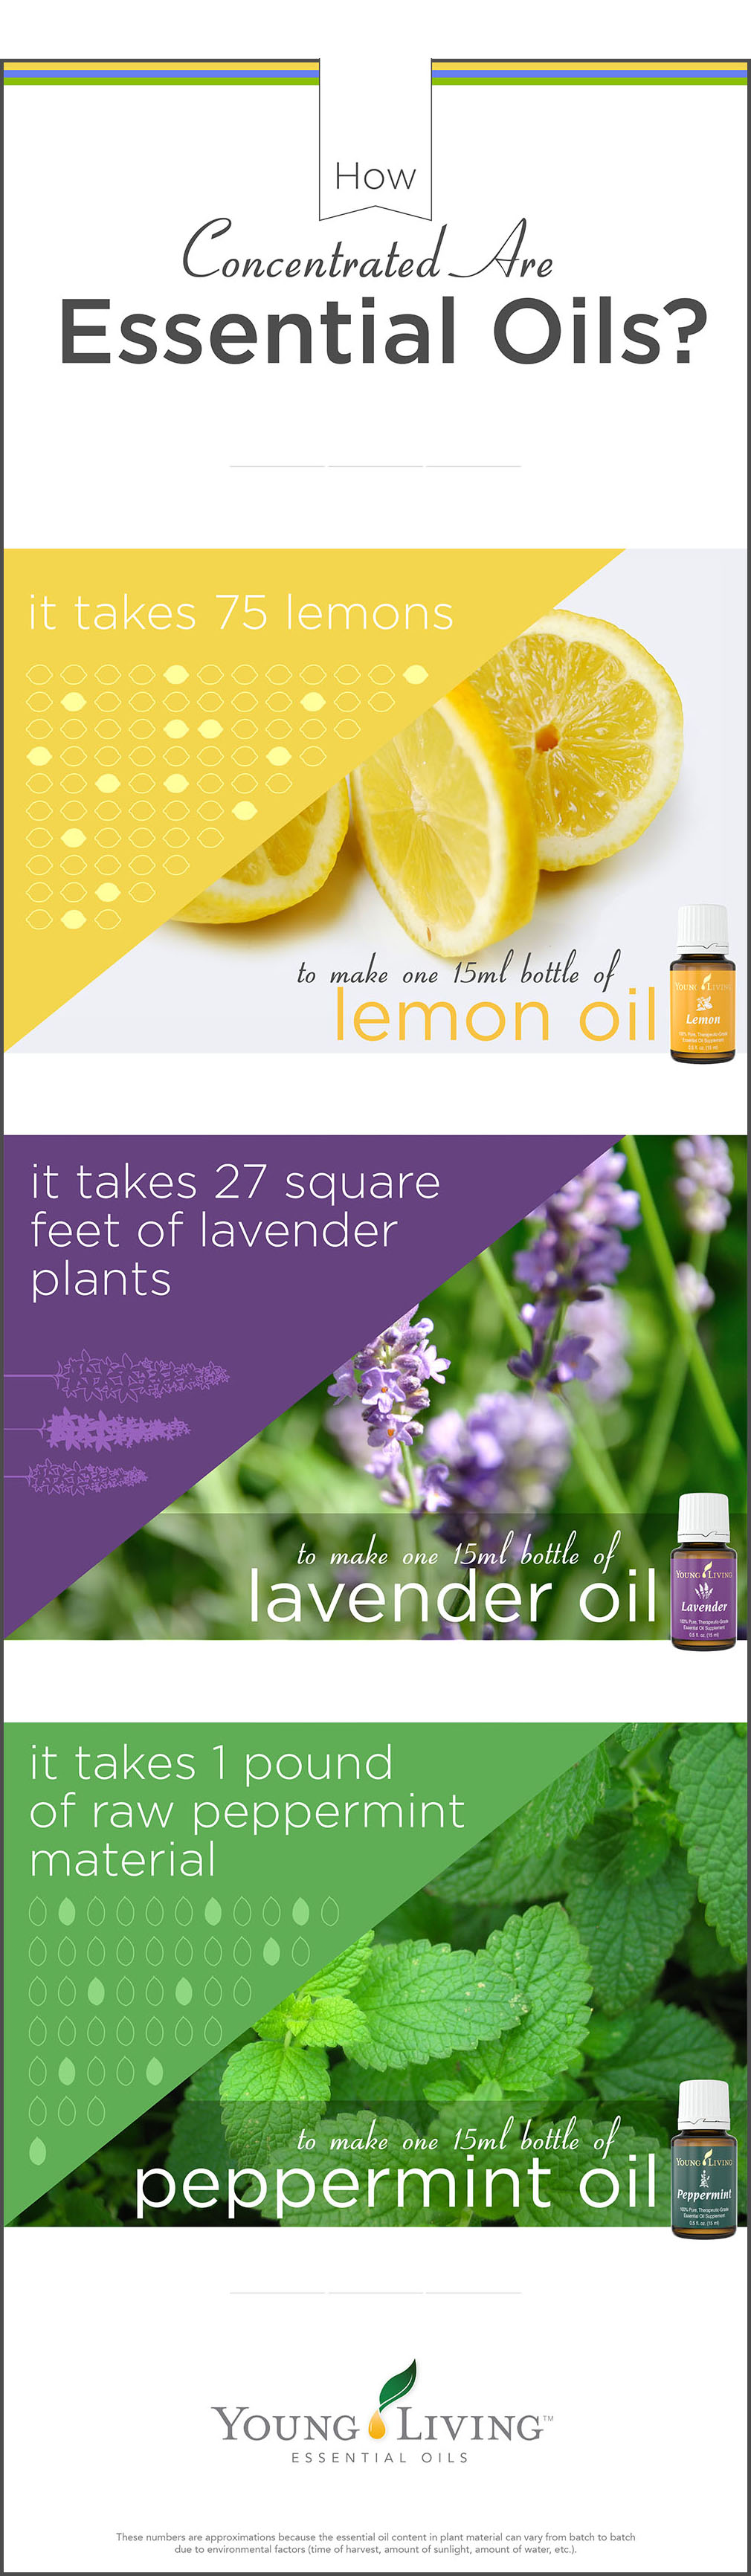 Young Living Essential Oils - How Concentrated Oils Are; For each 15ml bottle it takes: 75 lemons; 27 square feet of lavender plants; 1 pound of peppermint material.